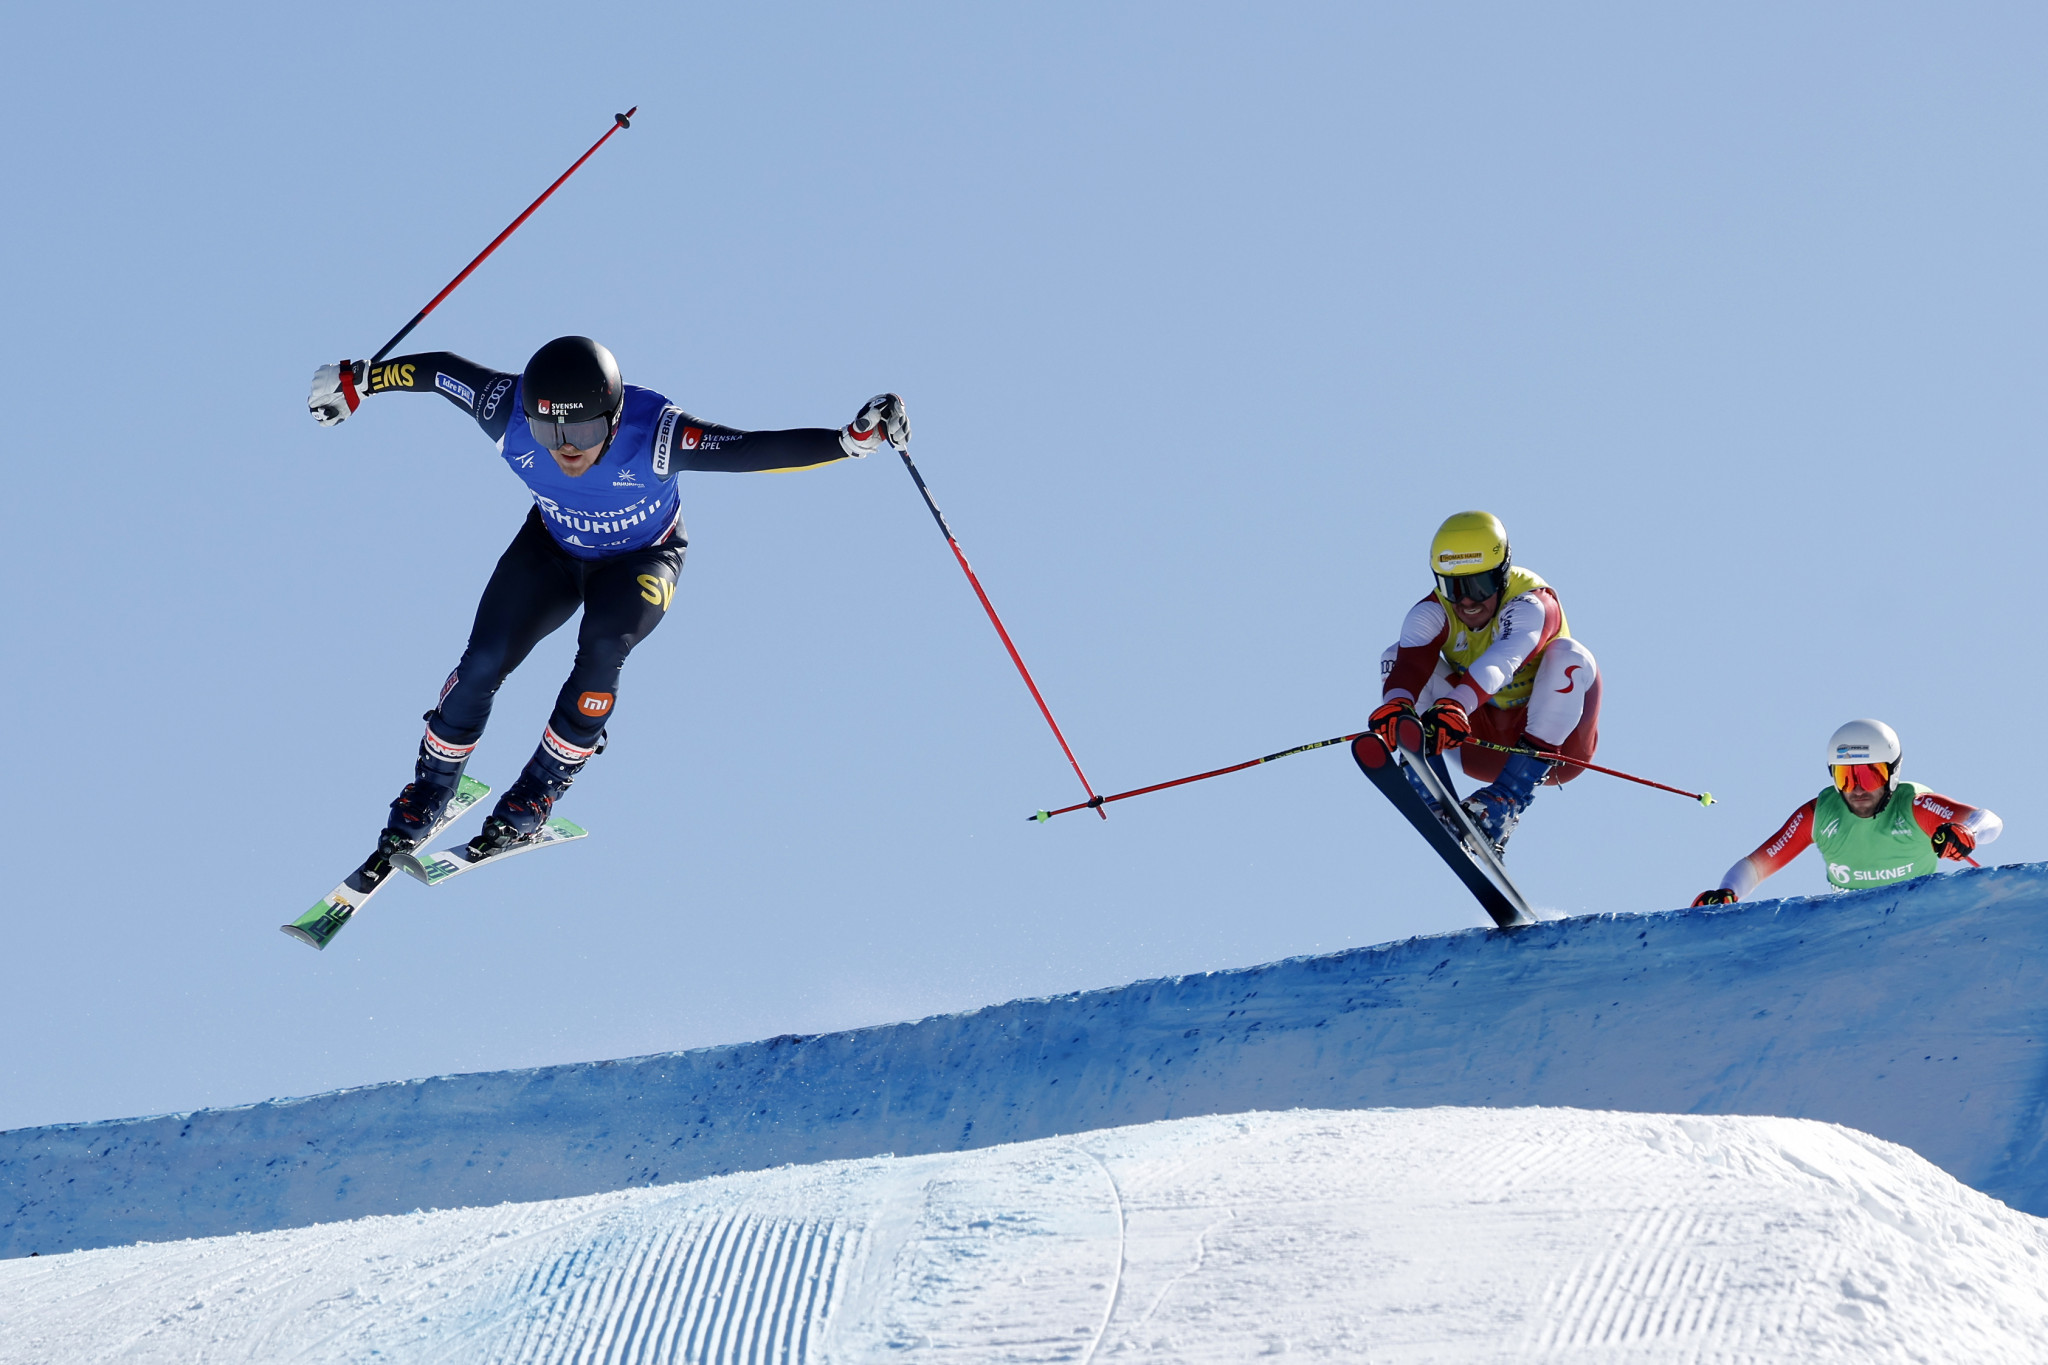 Mobärg and Smith show good form in FIS Ski Cross World Cup qualification